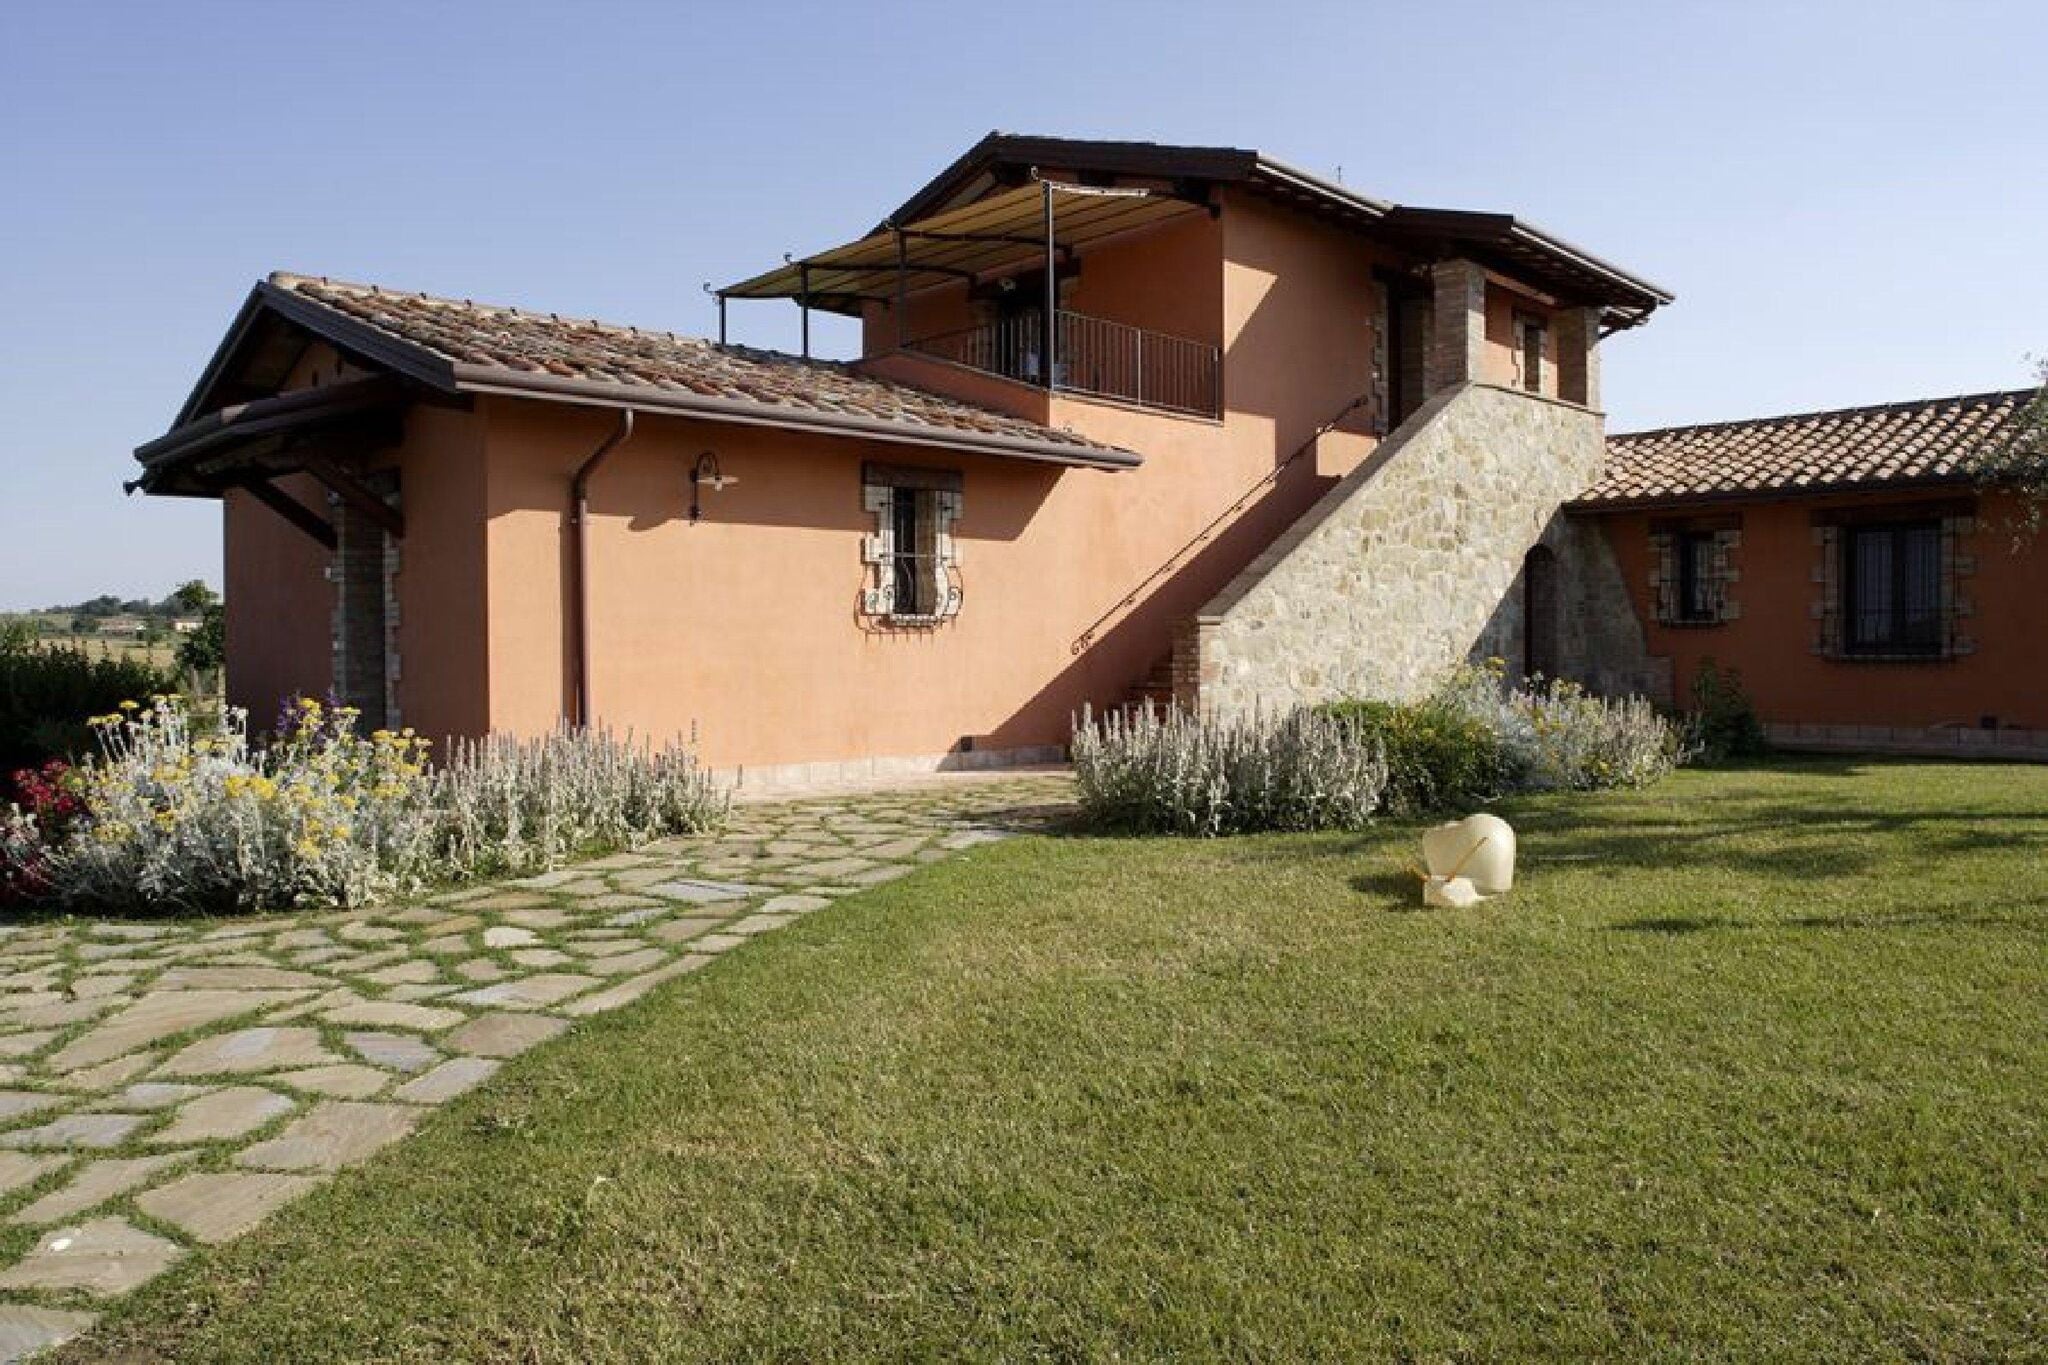 Holiday apartment on a farm in Umbria.